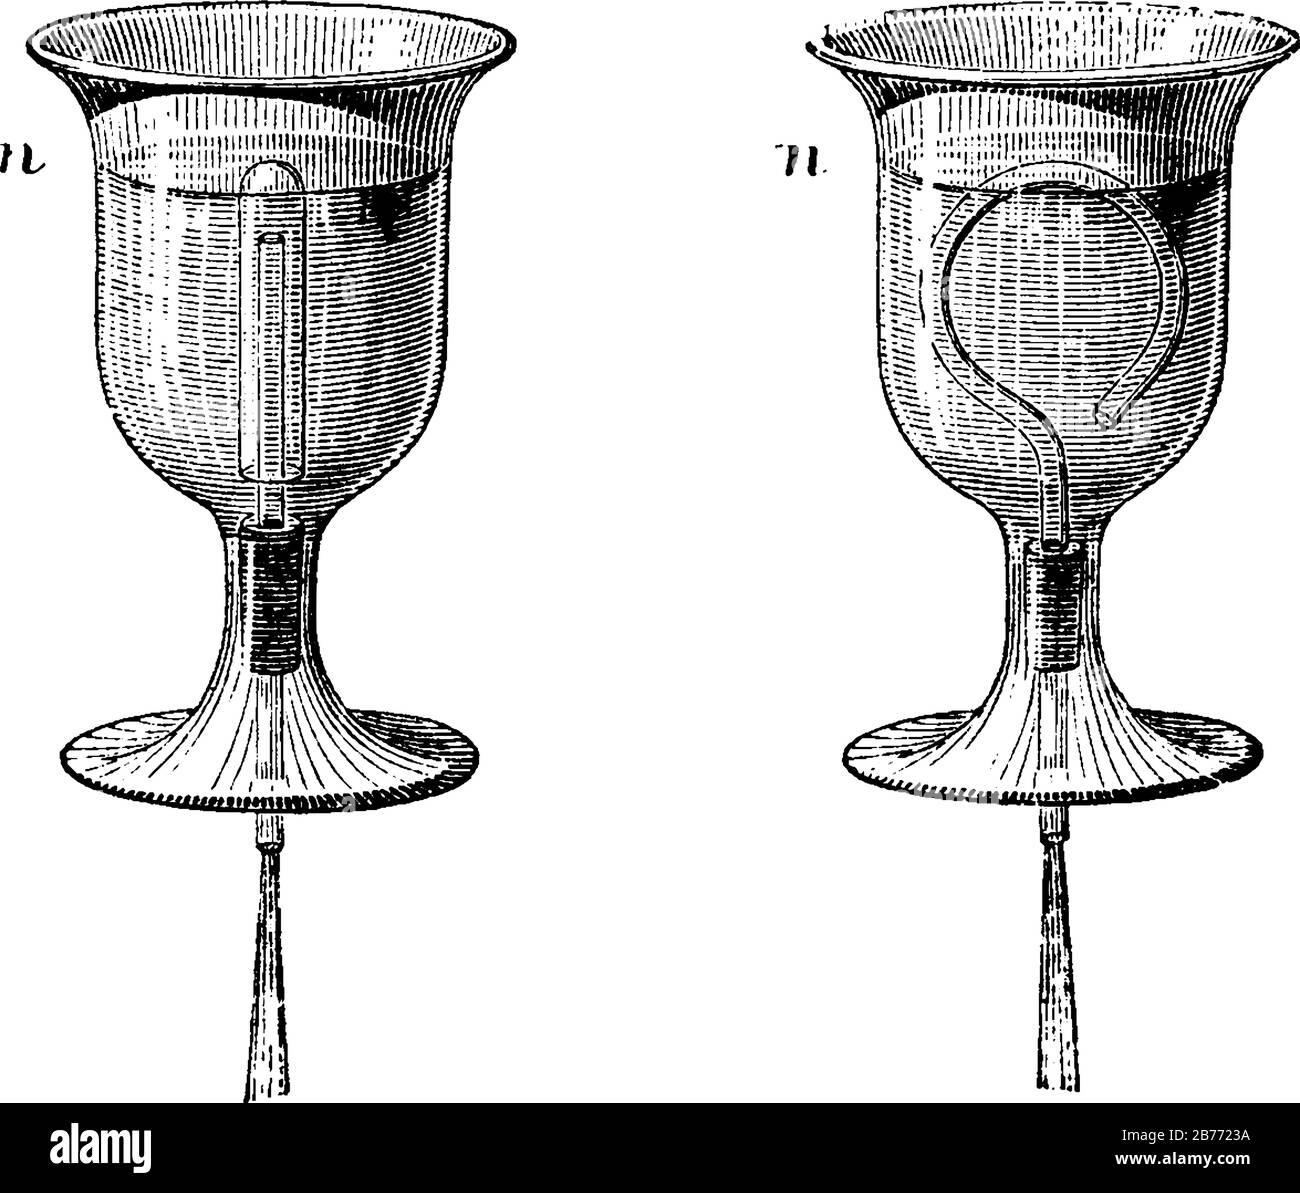 A cup or vase with hook shape tube in center often called Vase of Tantalus, this cup cannot be filled completely, vintage line drawing or engraving il Stock Vector